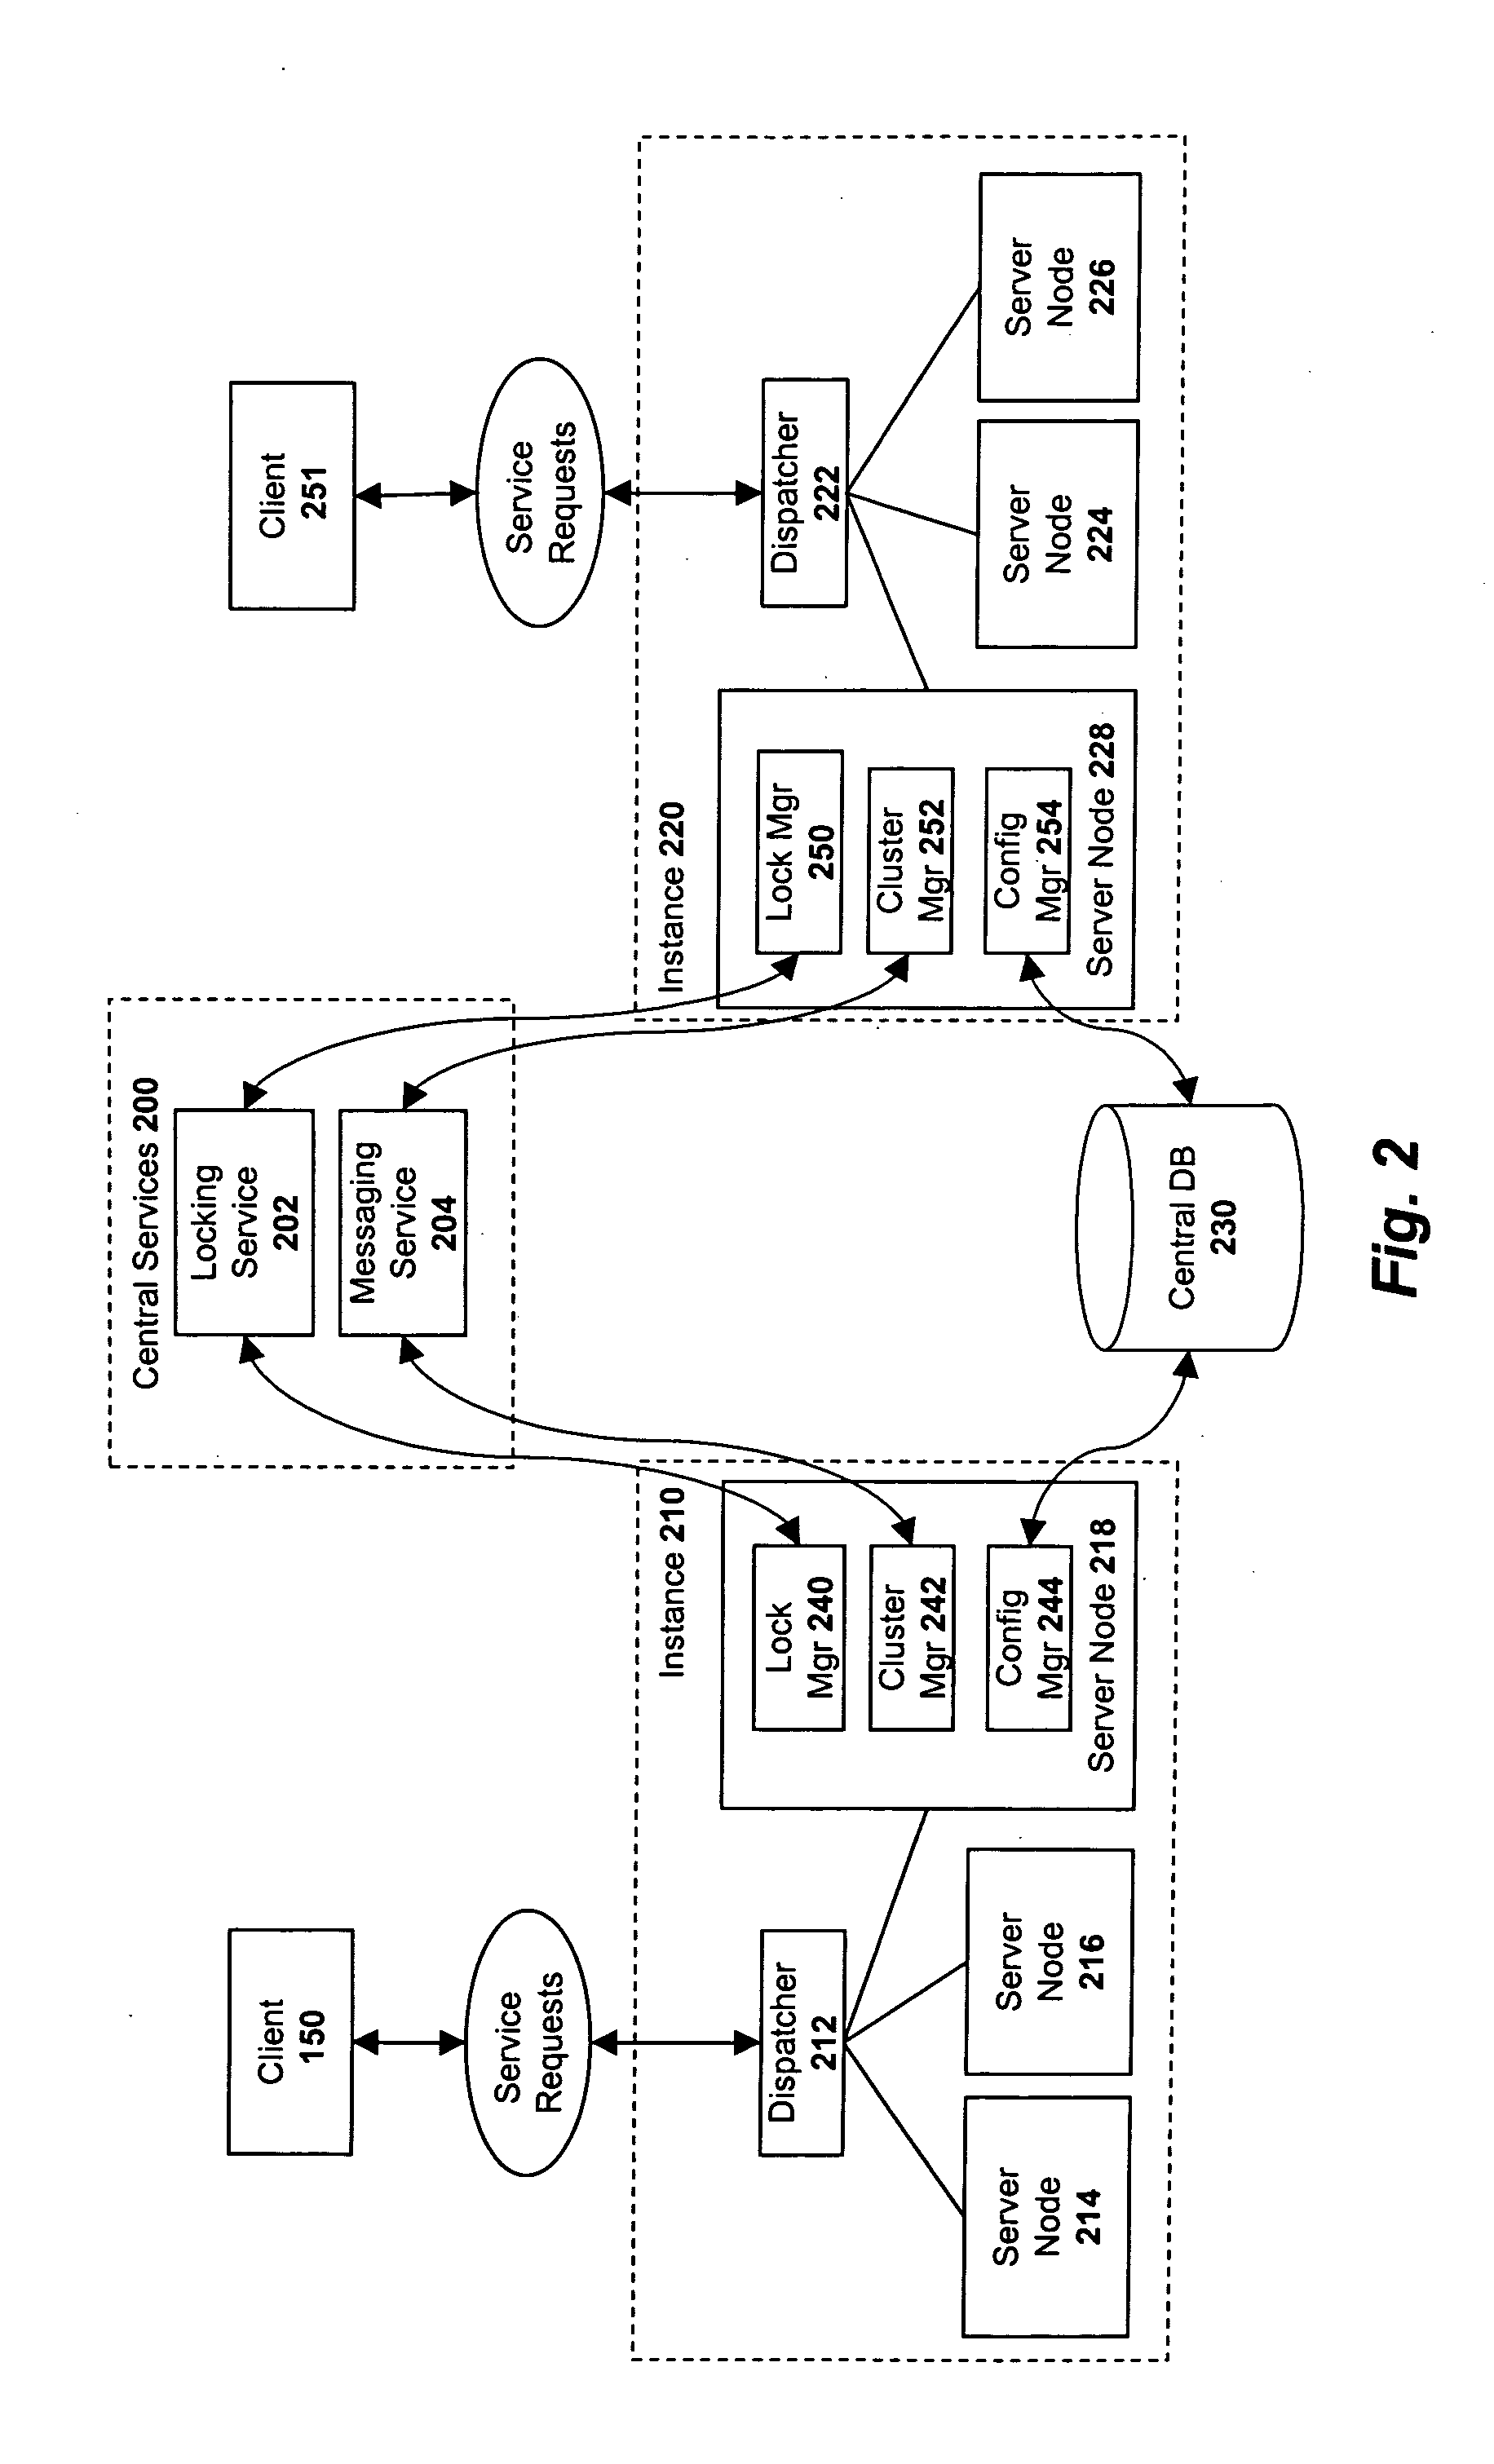 Tunneling apparatus and method for client-server communication